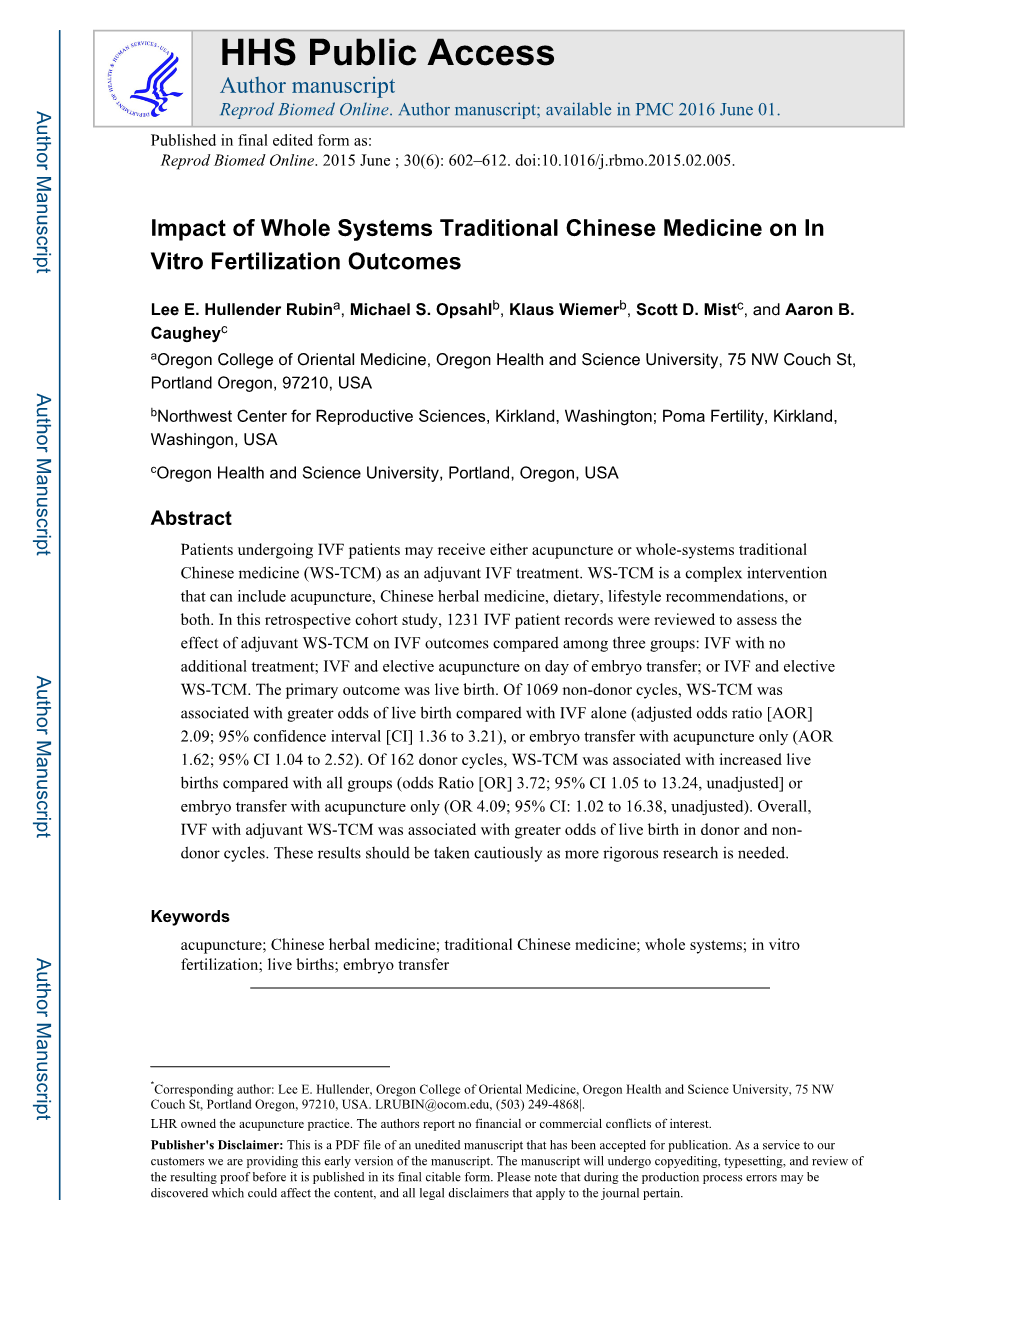 Impact of Whole Systems Traditional Chinese Medicine on in Vitro Fertilization Outcomes